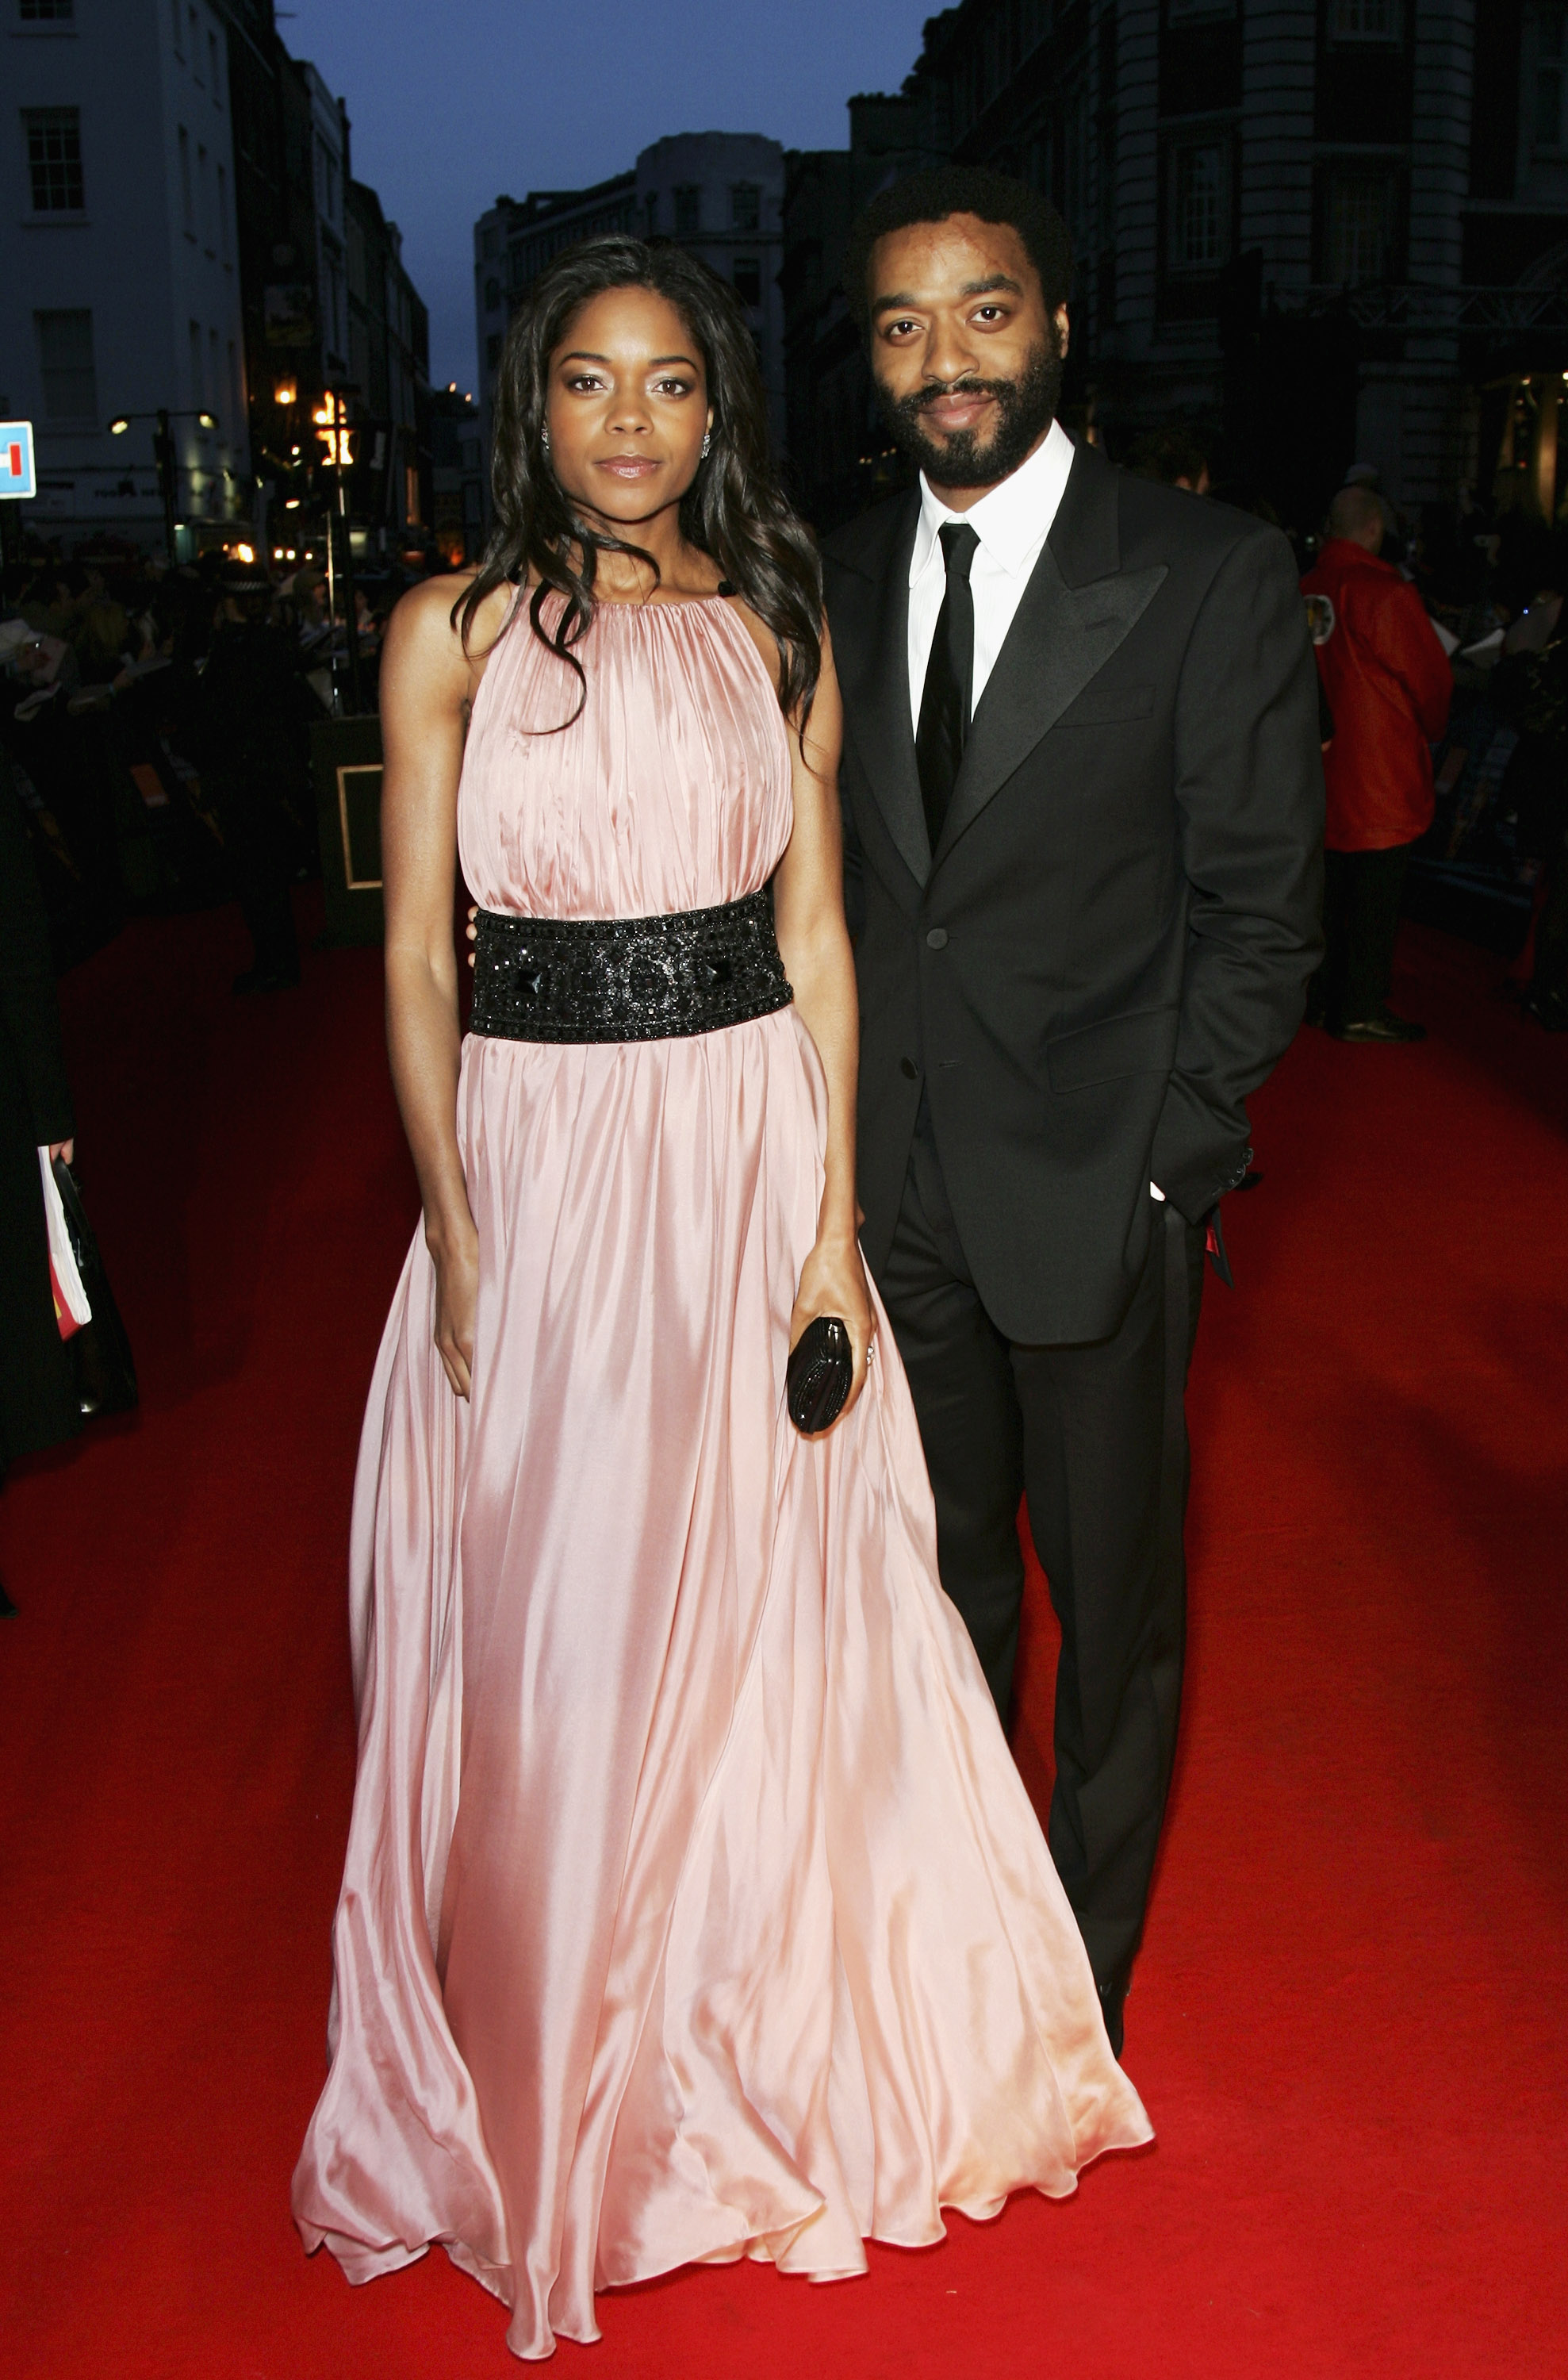 Naomie Harris and Chiwetel Ejiofor arrive at the Orange British Academy Film Awards (BAFTAs) at the Royal Opera House on February 11, 2007, in London, England | Source: Getty Images